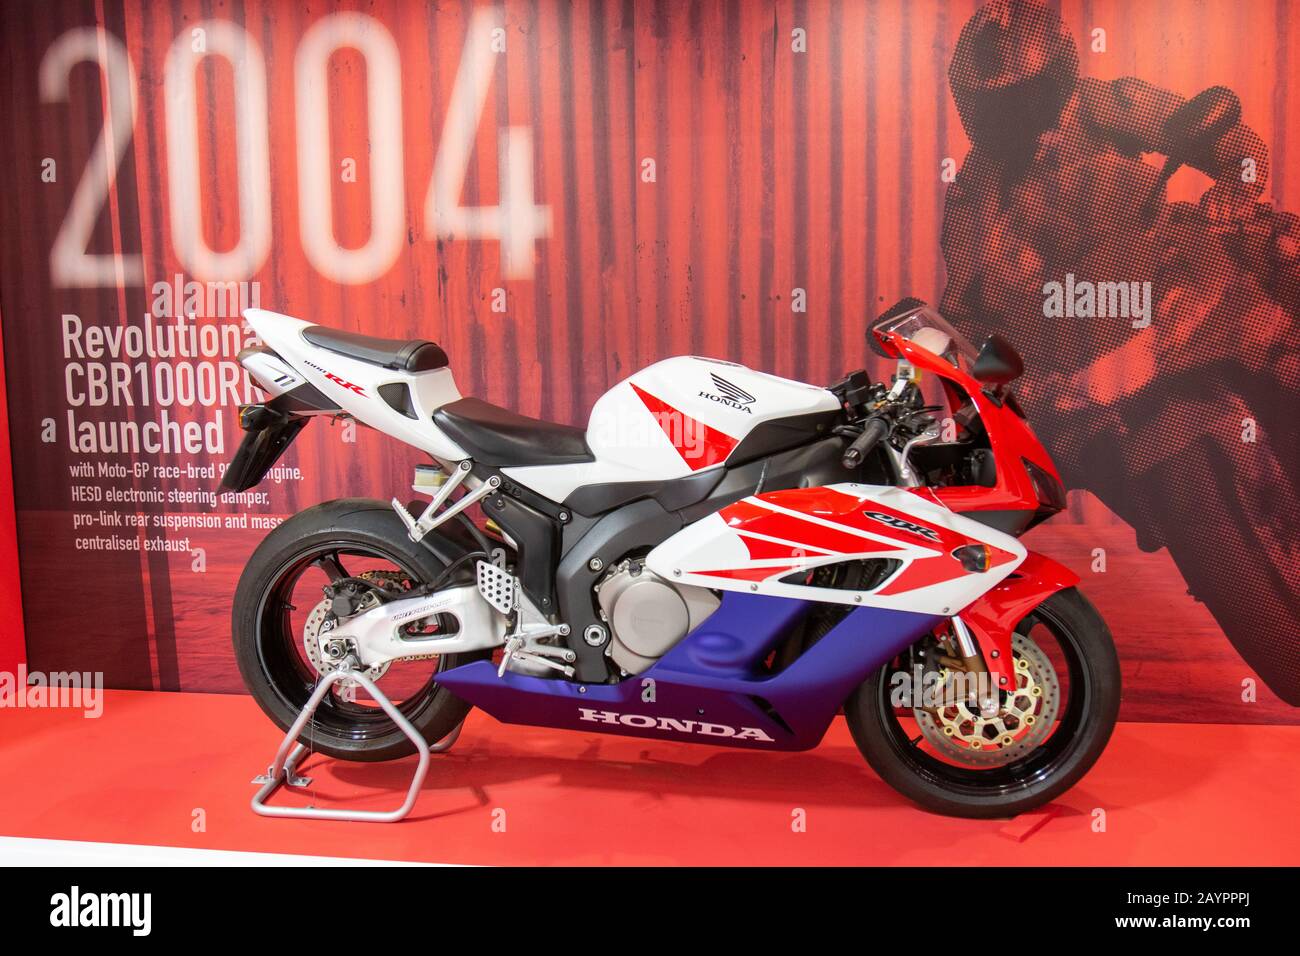 Cbr 1000rr hi-res stock photography and images - Alamy